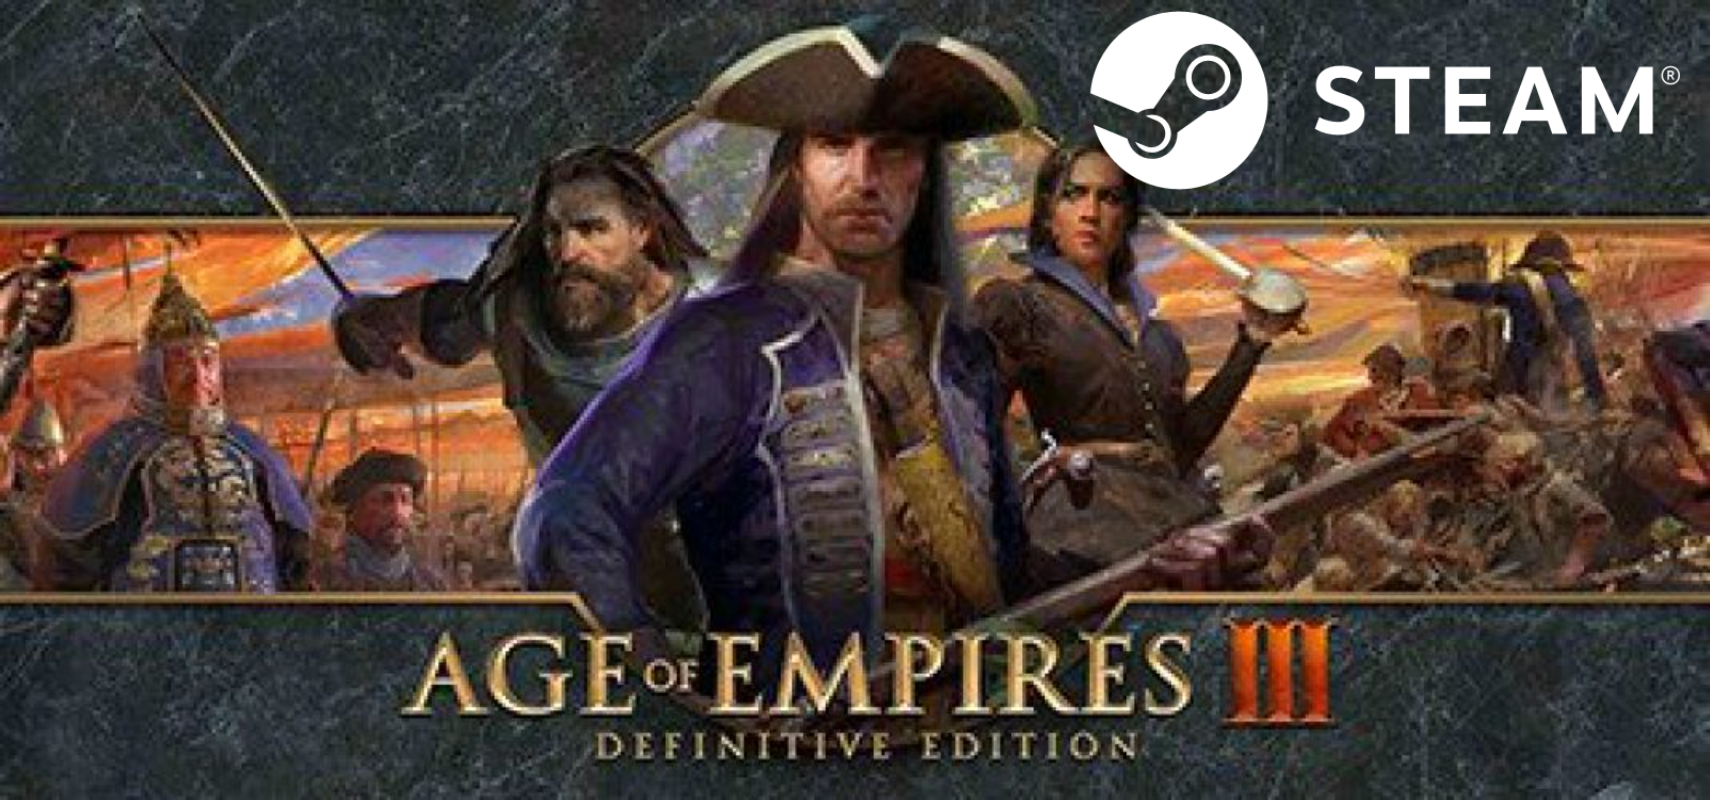 Age empires definitive steam фото 45